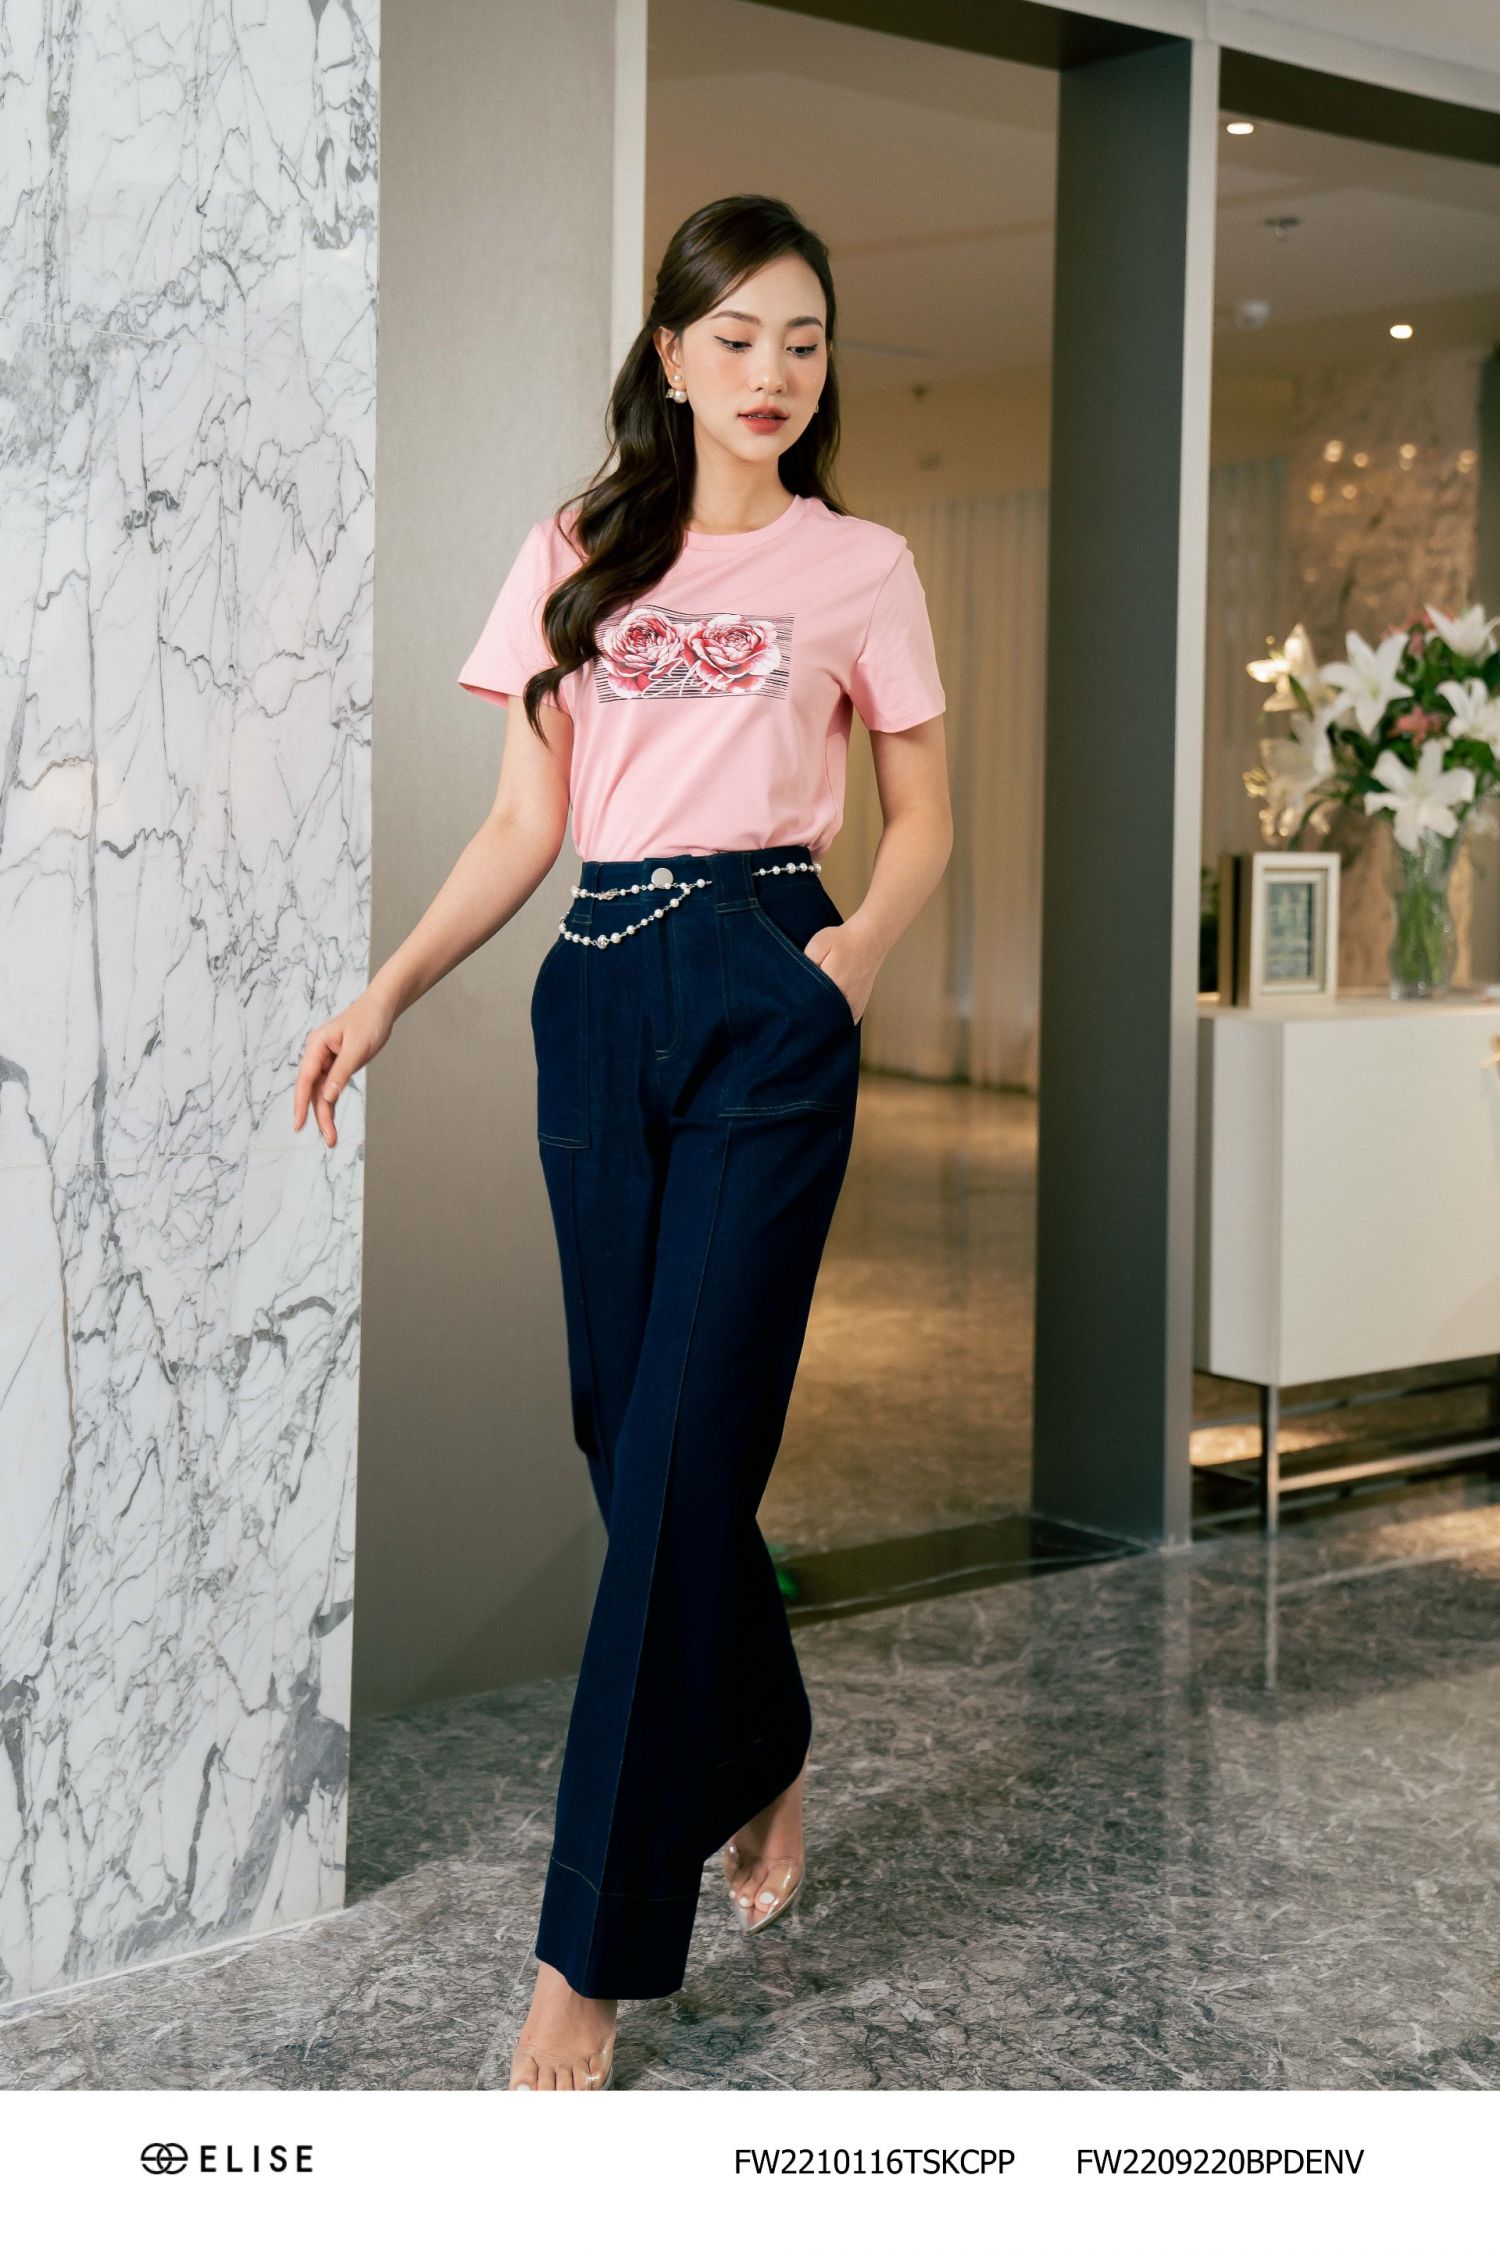 QUẦN JEANS TT ỐNG VẨY LY GIỮA